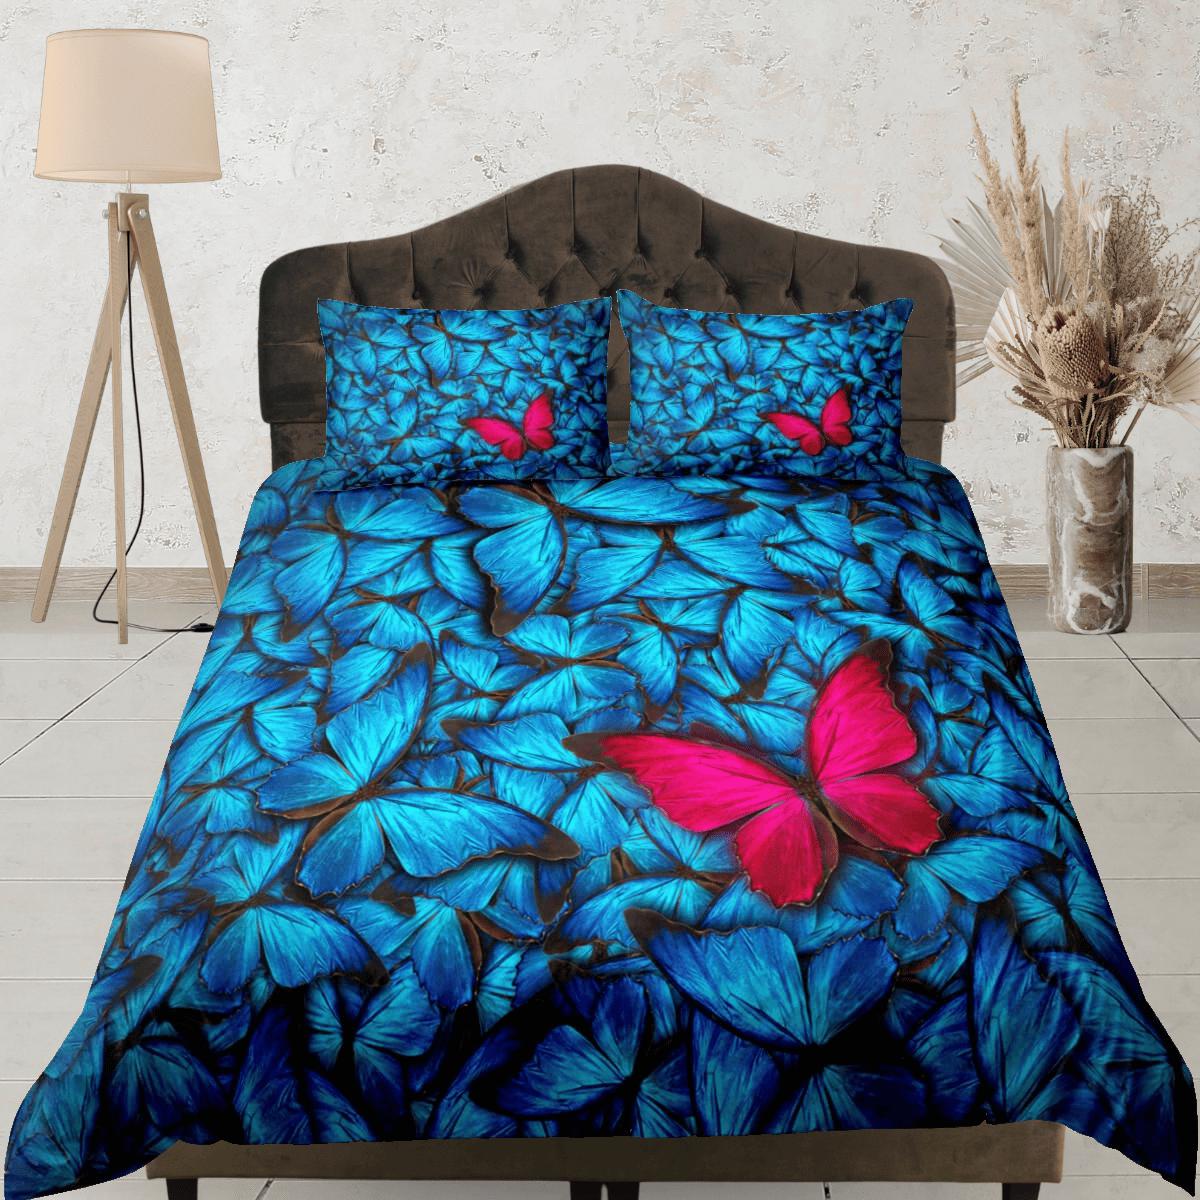 daintyduvet Stand out butterfly bedding blue duvet cover colorful dorm bedding full size adult duvet king queen twin, butterfly nursery toddler bedding